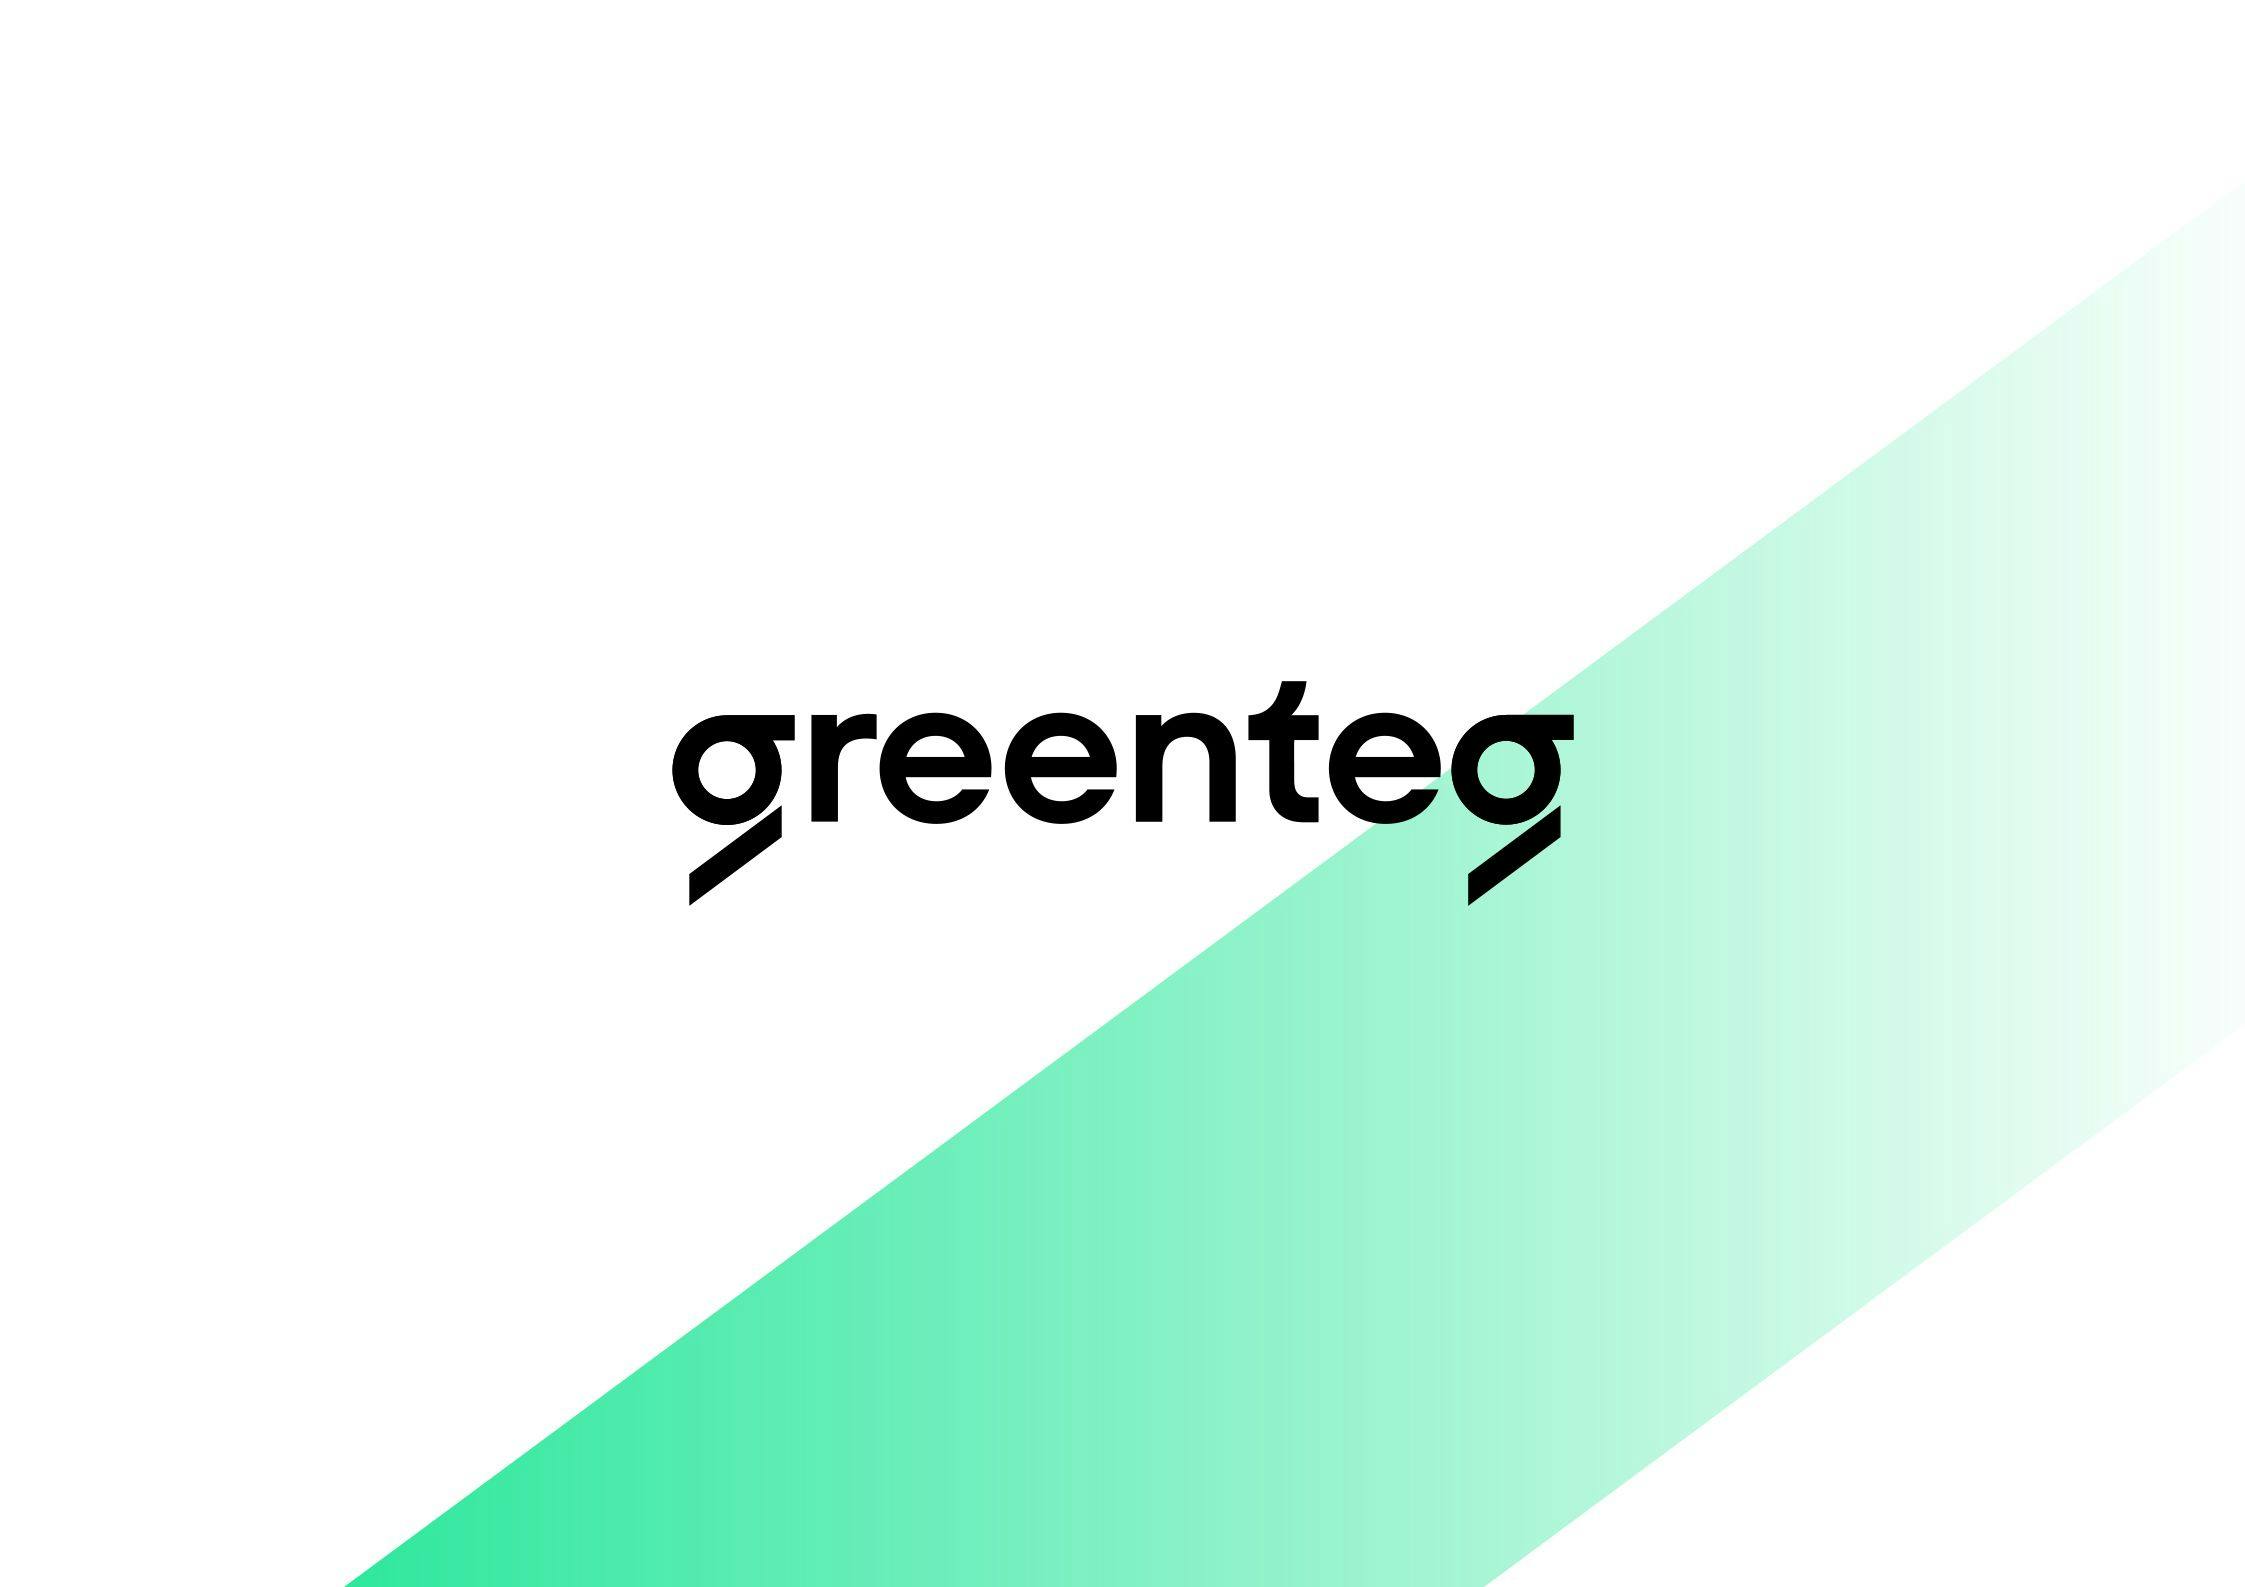 greenteg Accelerates Global Expansion With New Investors on Board